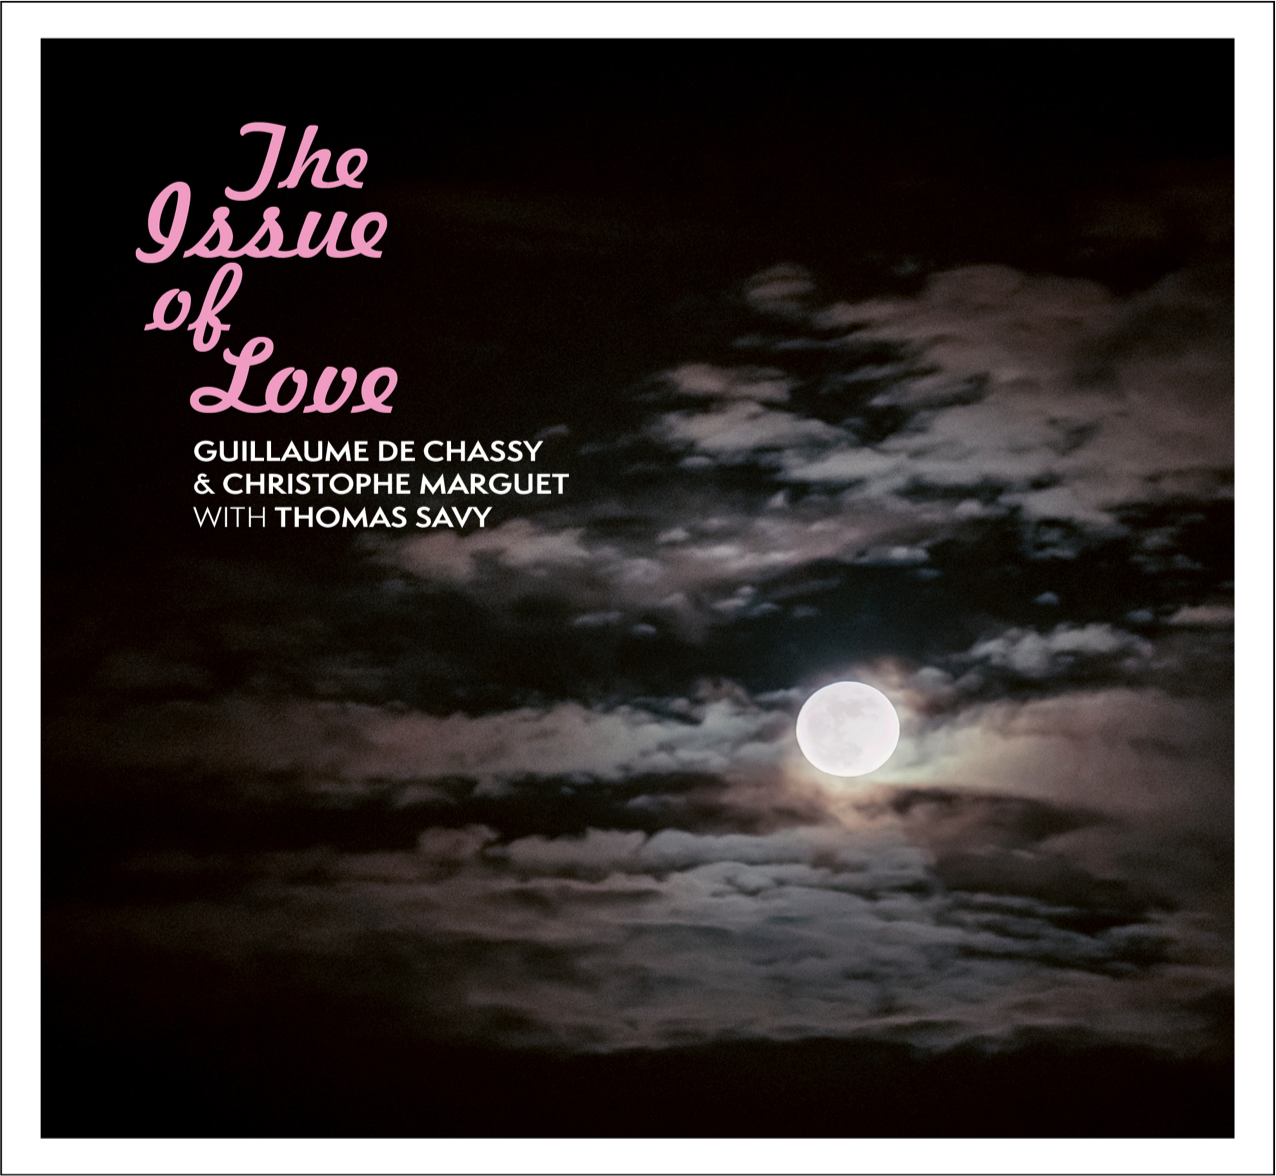 THE ISSUE OF LOVE